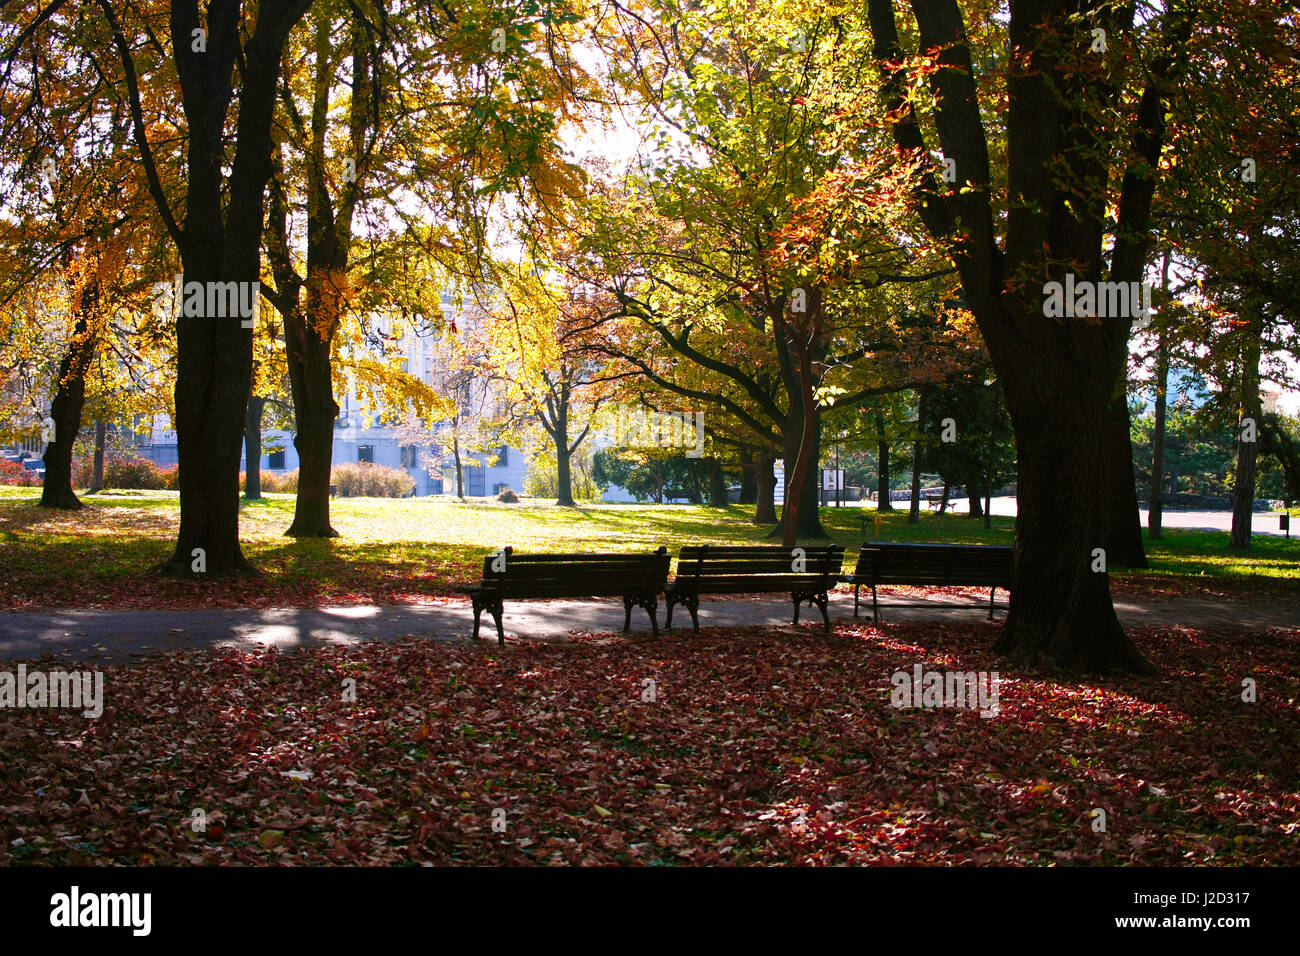 City park with benches in late autumn in medieval citadel of Belgrade, Serbia. Stock Photo